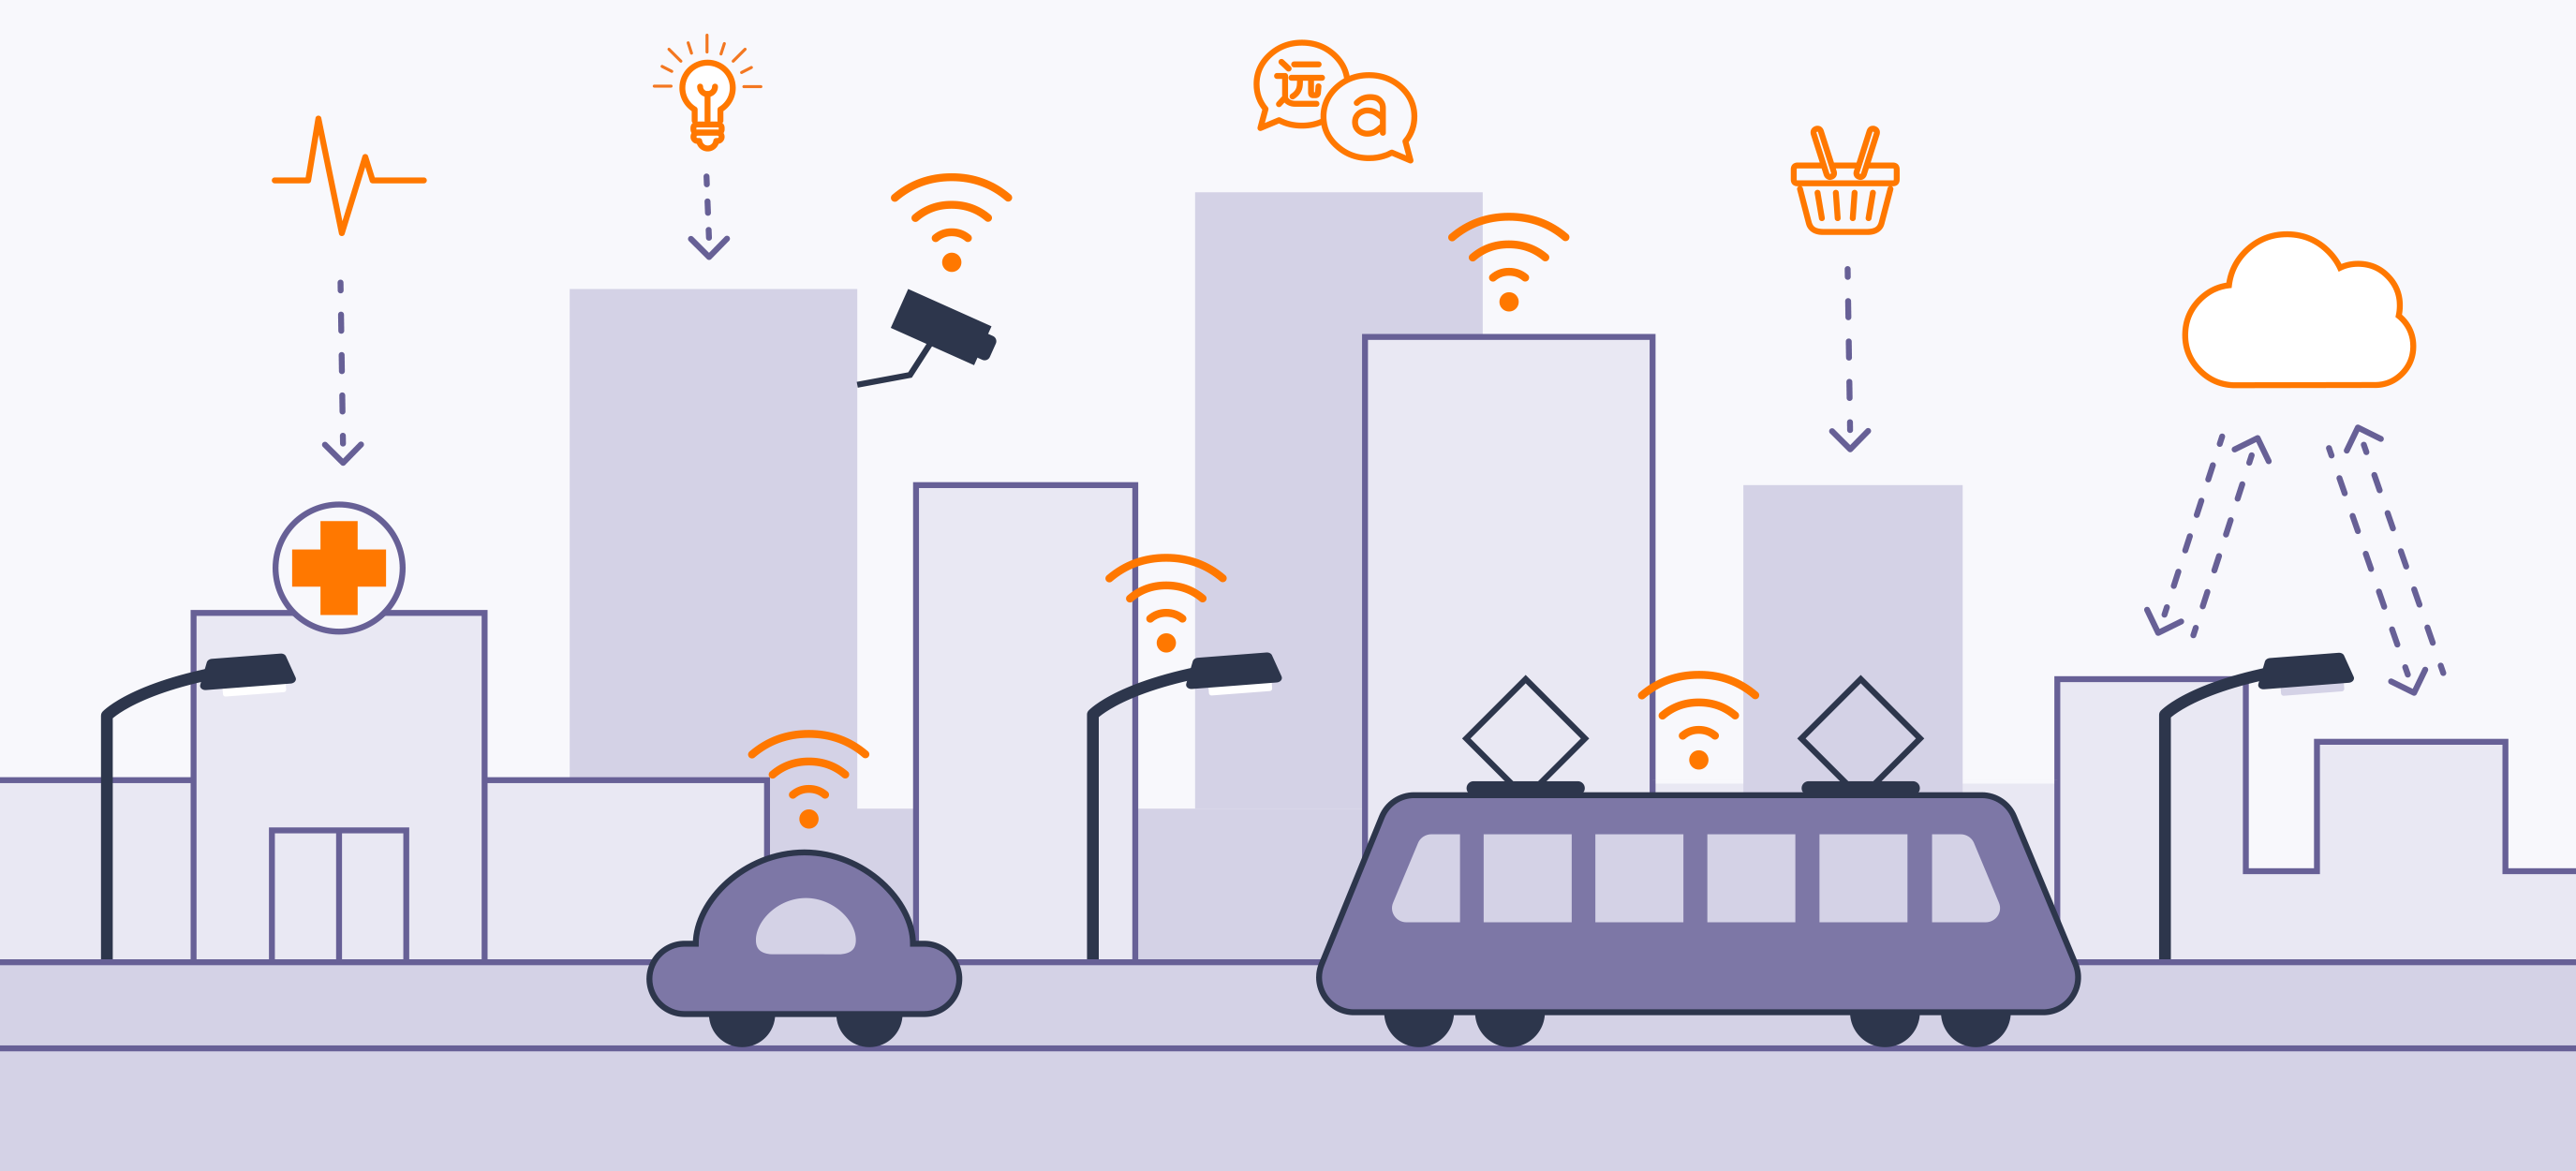 What_is_the_IoT-Smart_City-2